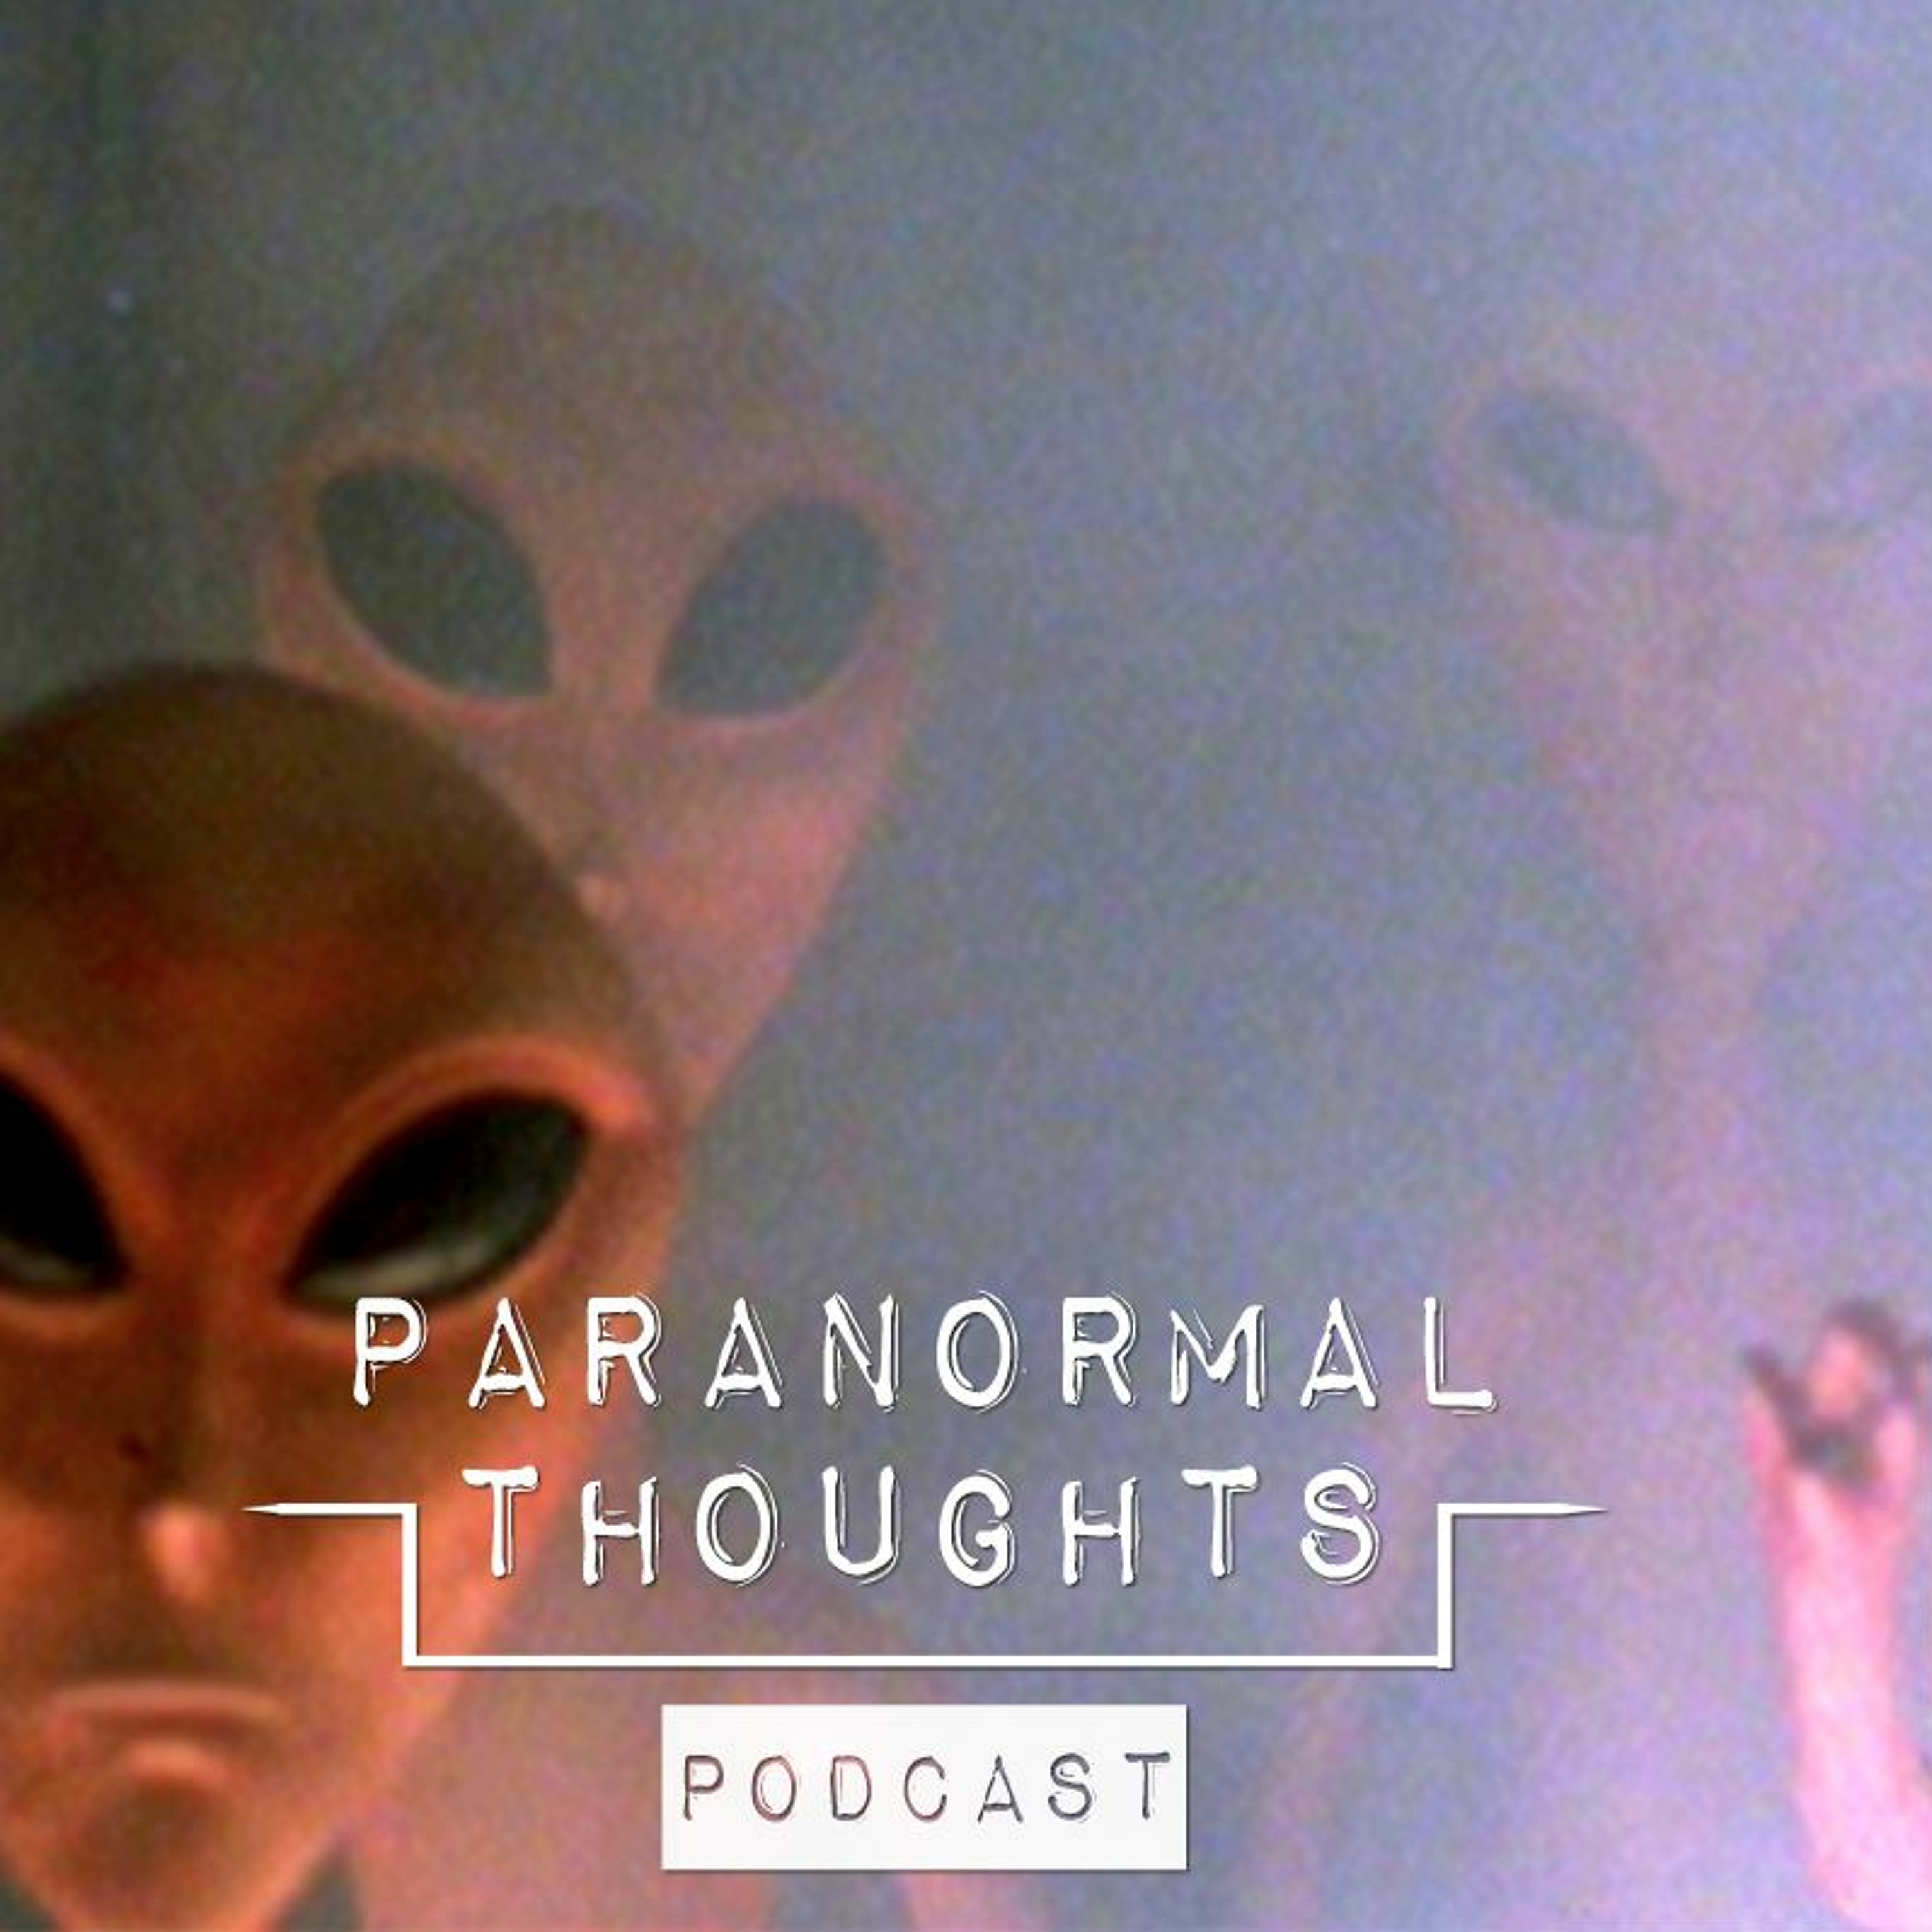 Alien Abduction Thoughts Podcast